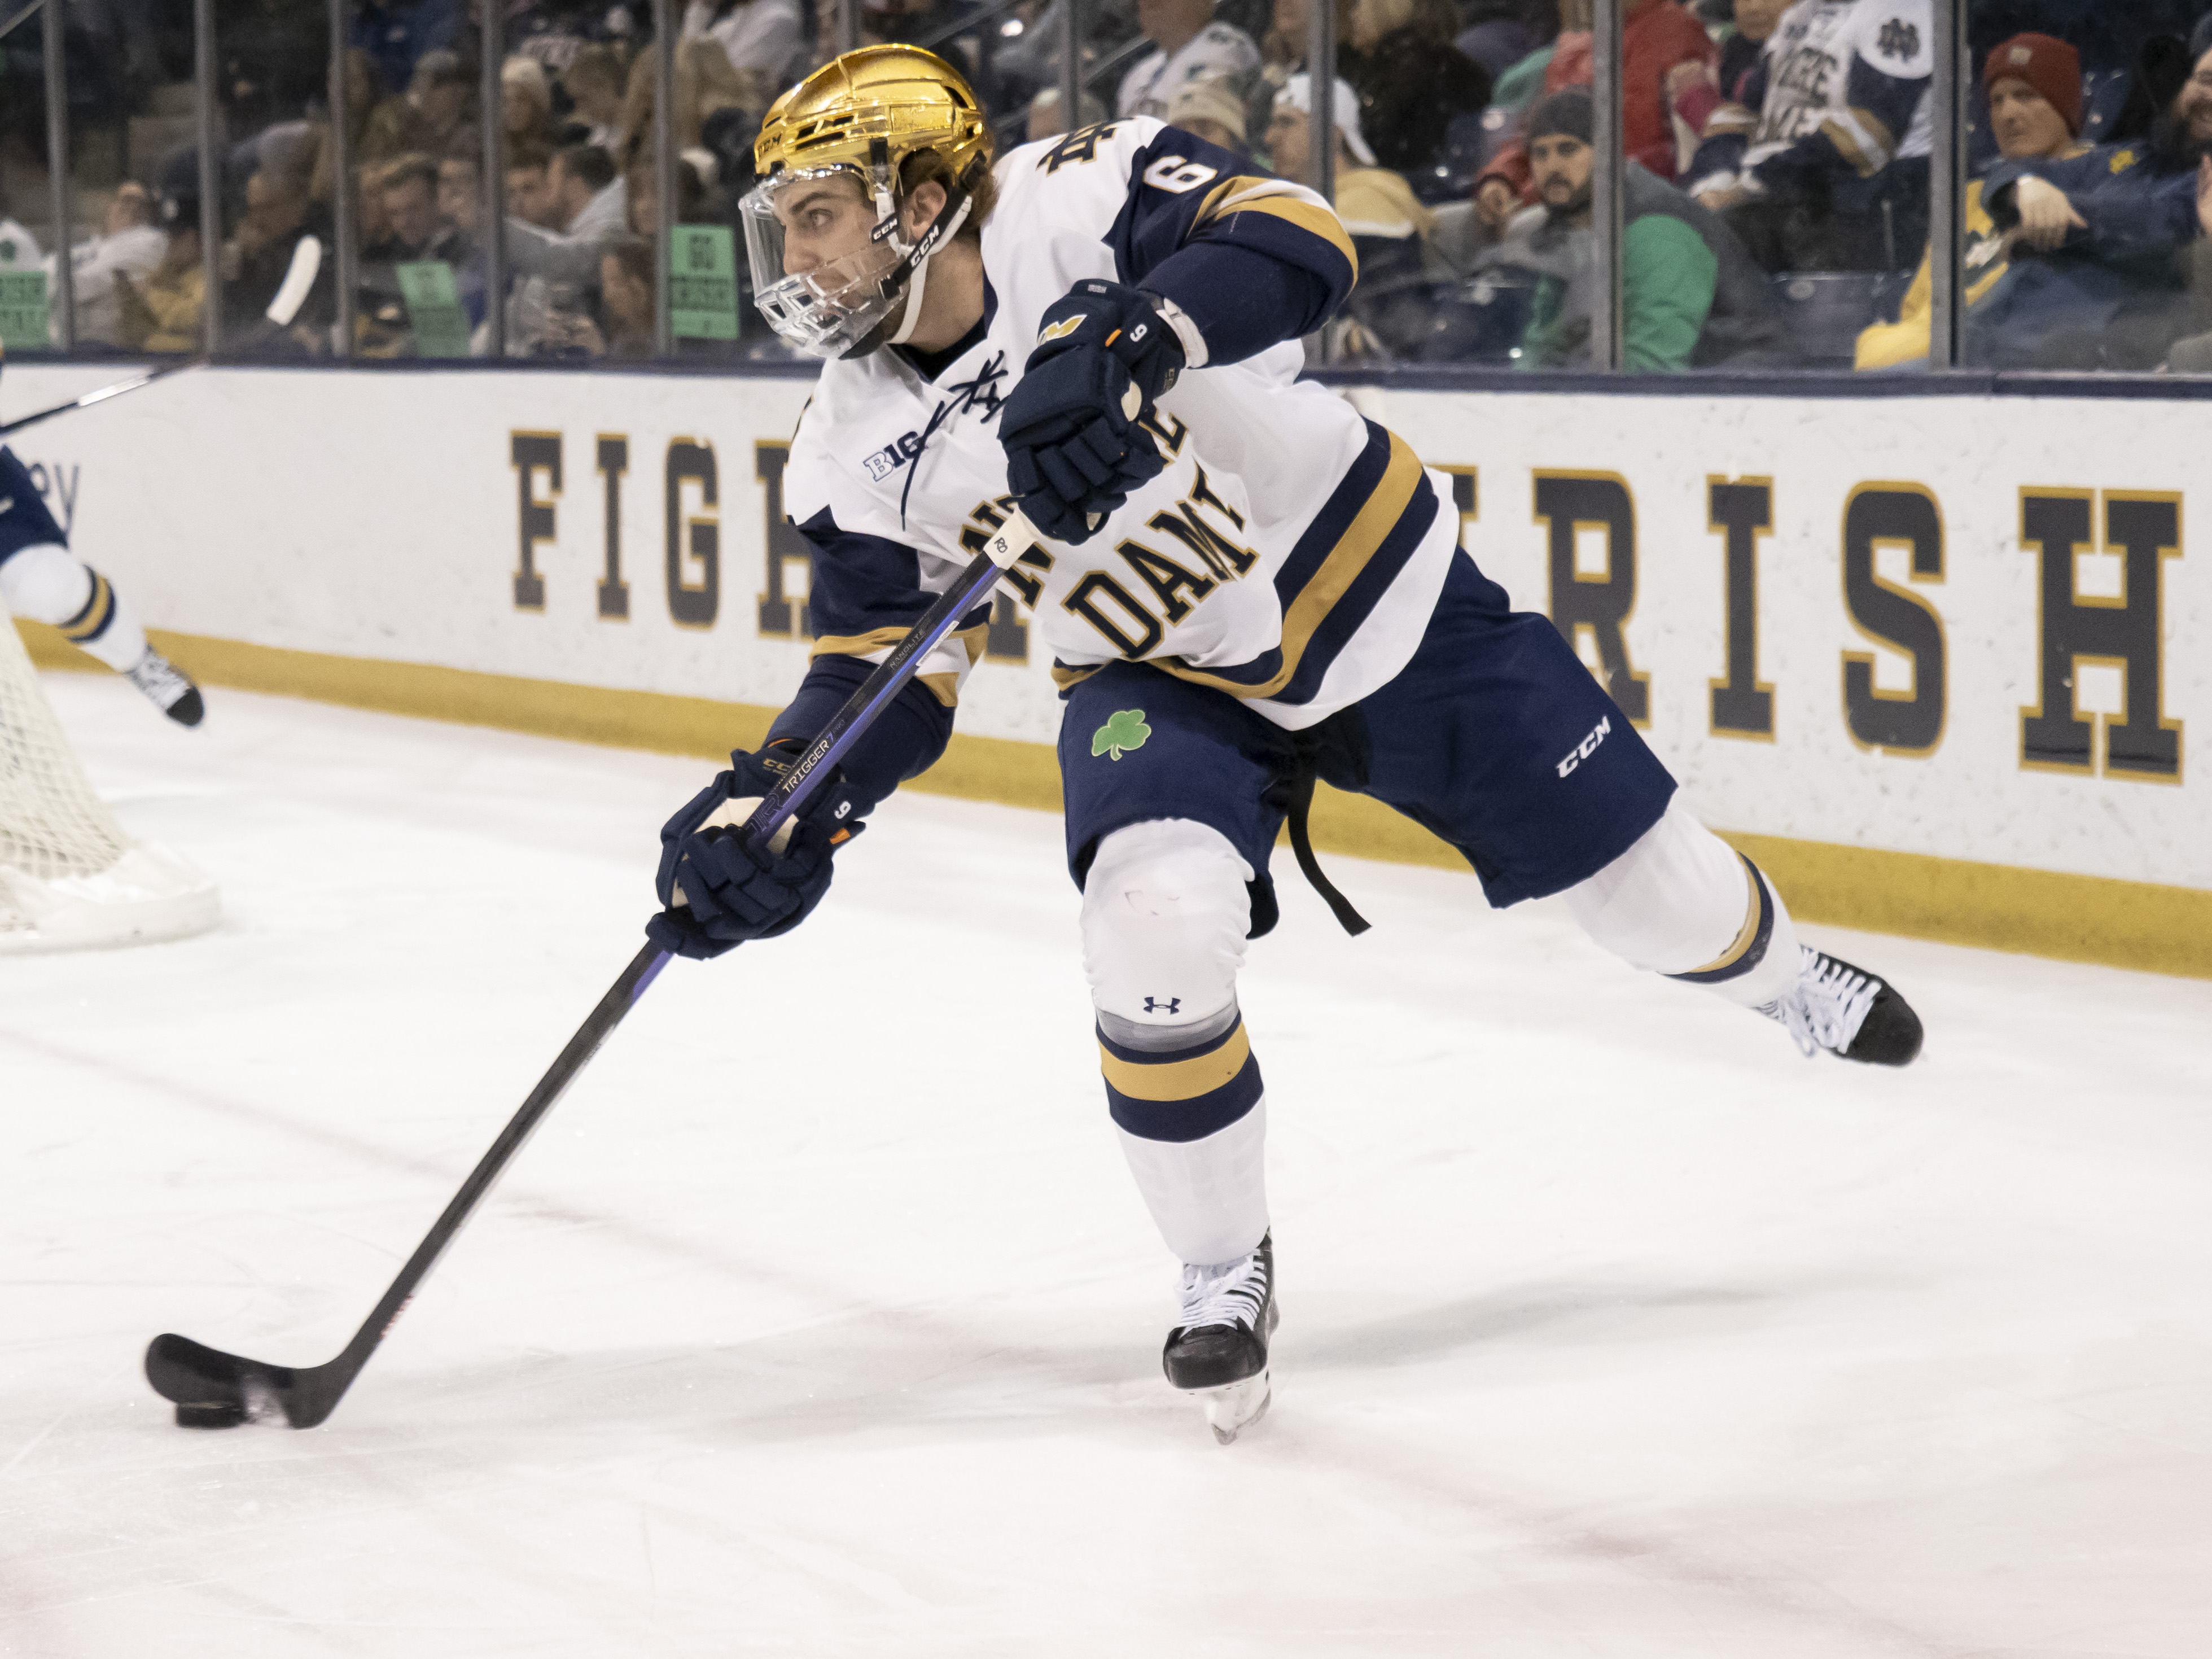 COLLEGE HOCKEY: JAN 28 Wisconsin at Notre Dame